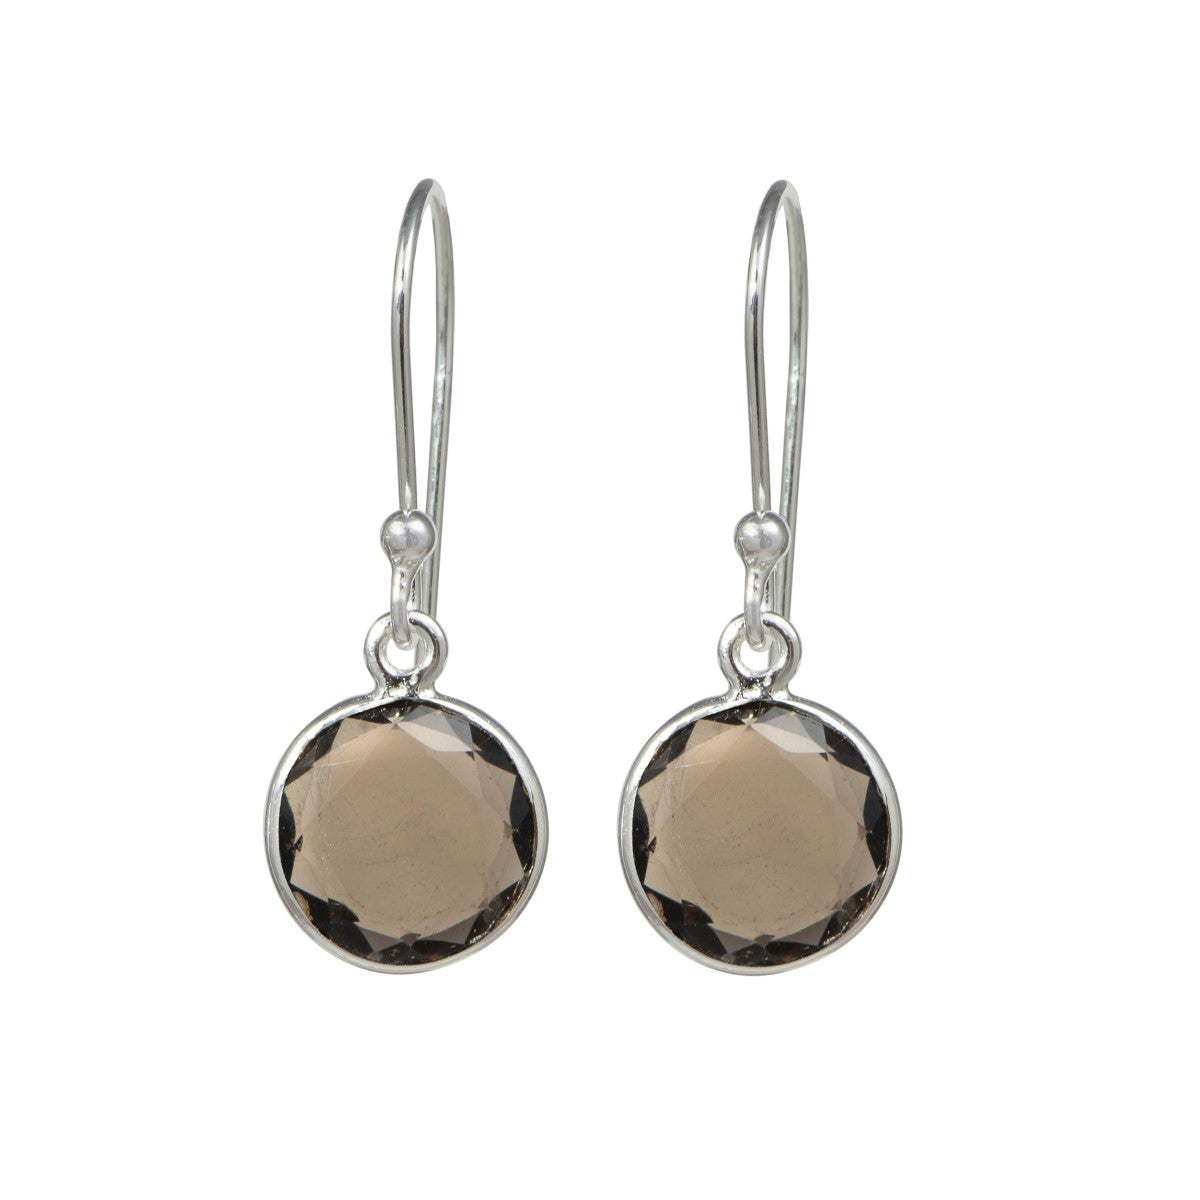 Smoky Quartz Sterling Silver Earrings with a Round Faceted Gemstone Drop